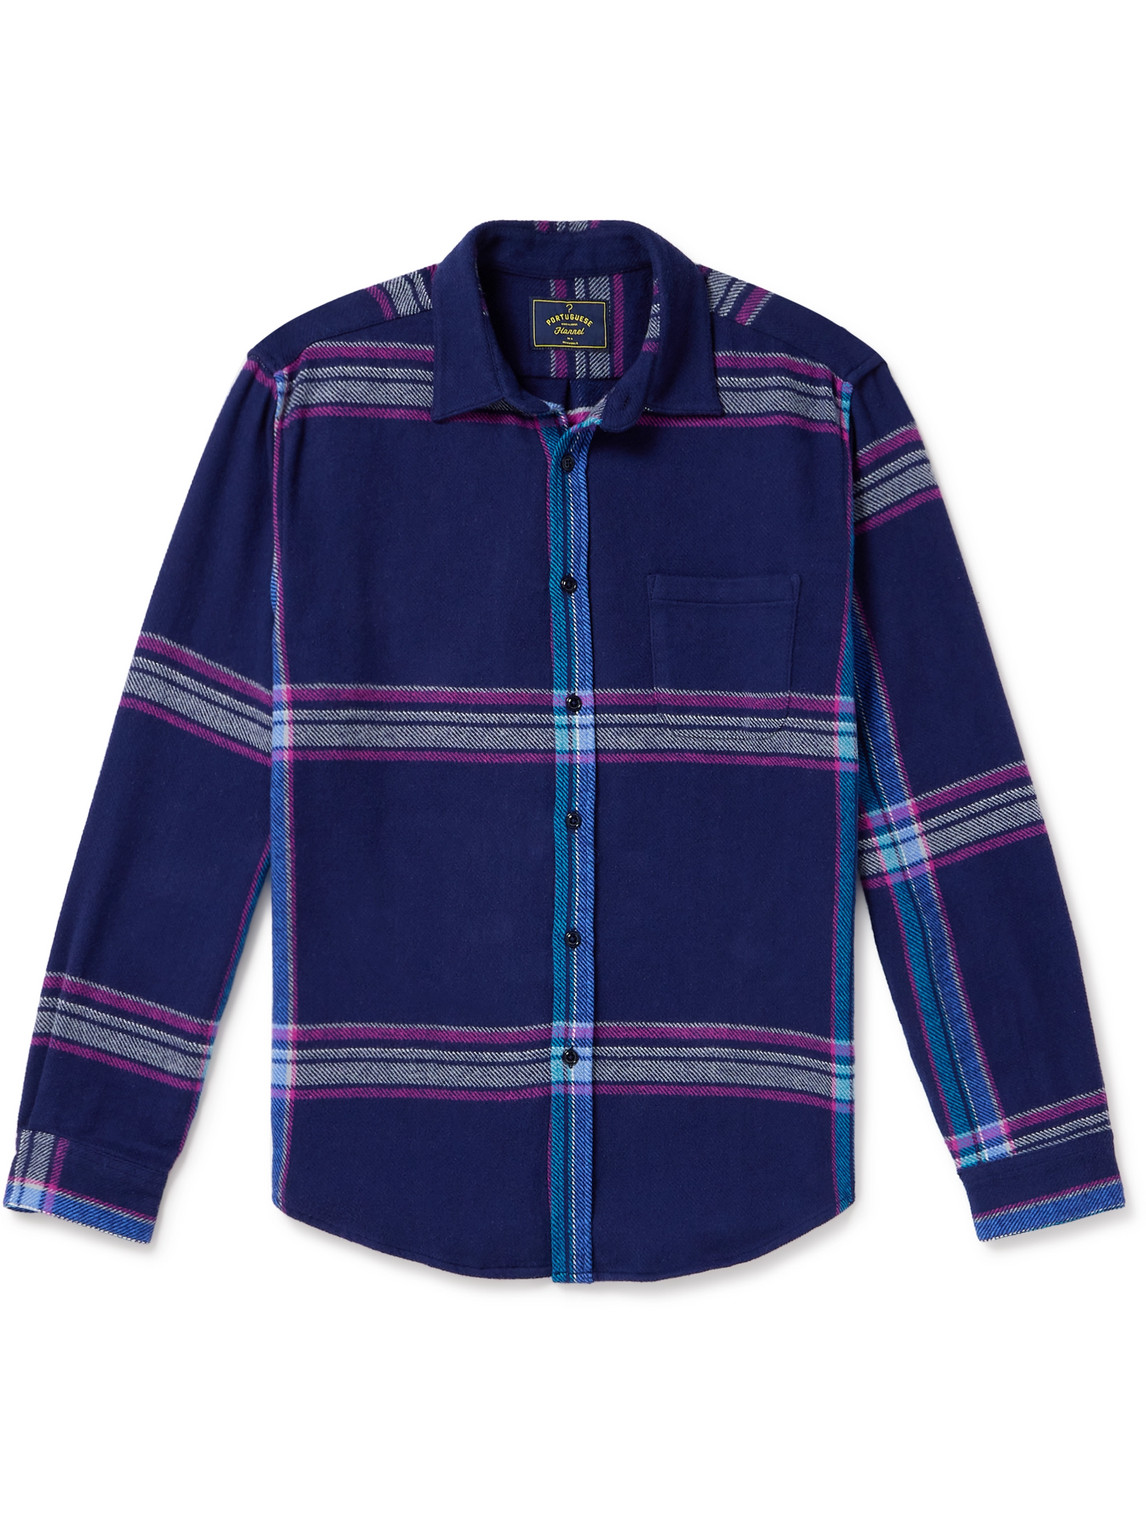 Portuguese Flannel Checked Cotton-flannel Shirt In Blue